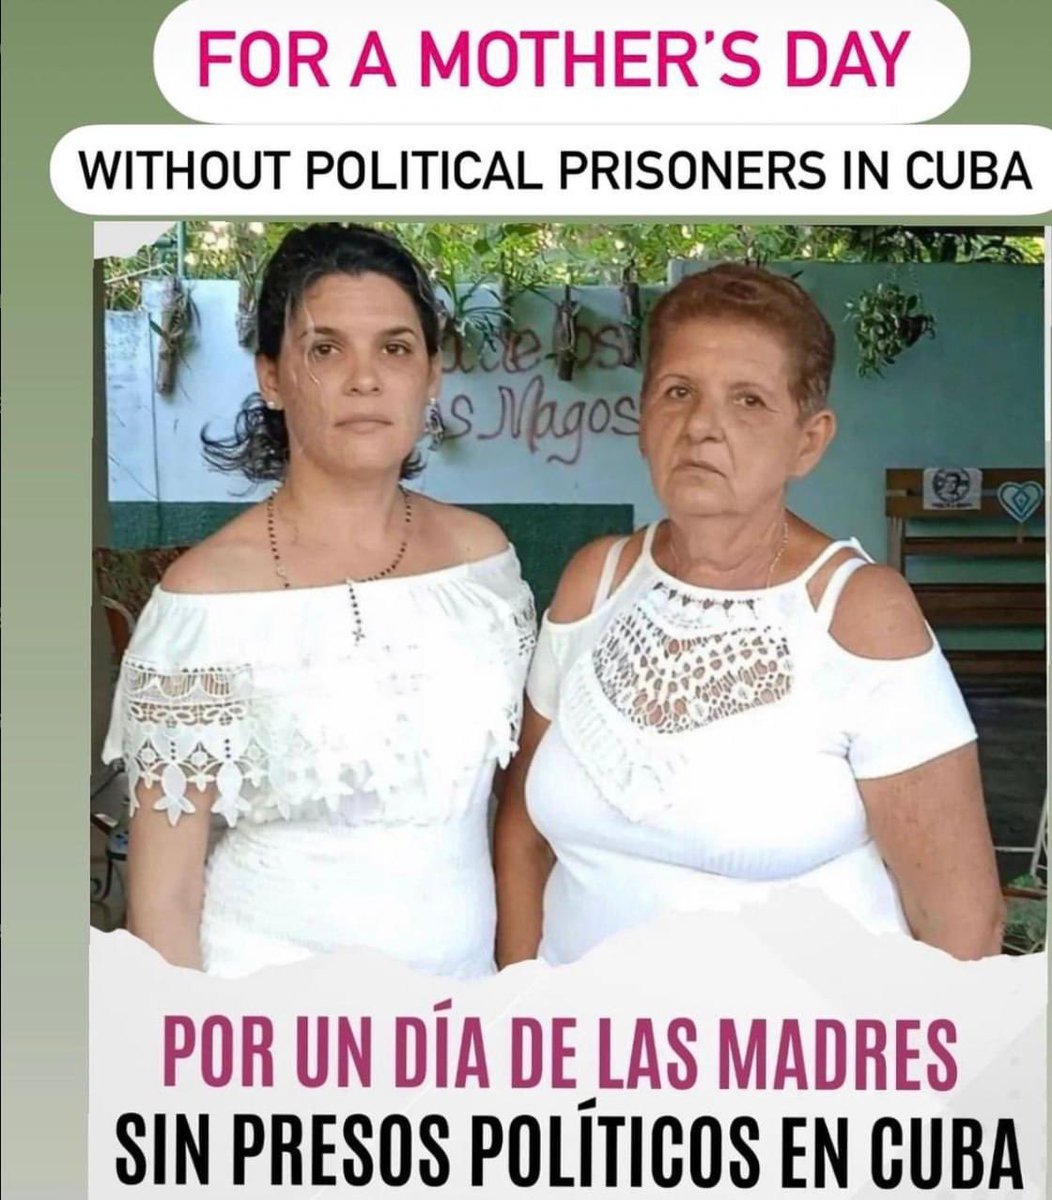 For a Mother’s Day without political prisoners #Cuba #Venezuela #Nicaragua #MothersDay #Setthemfree